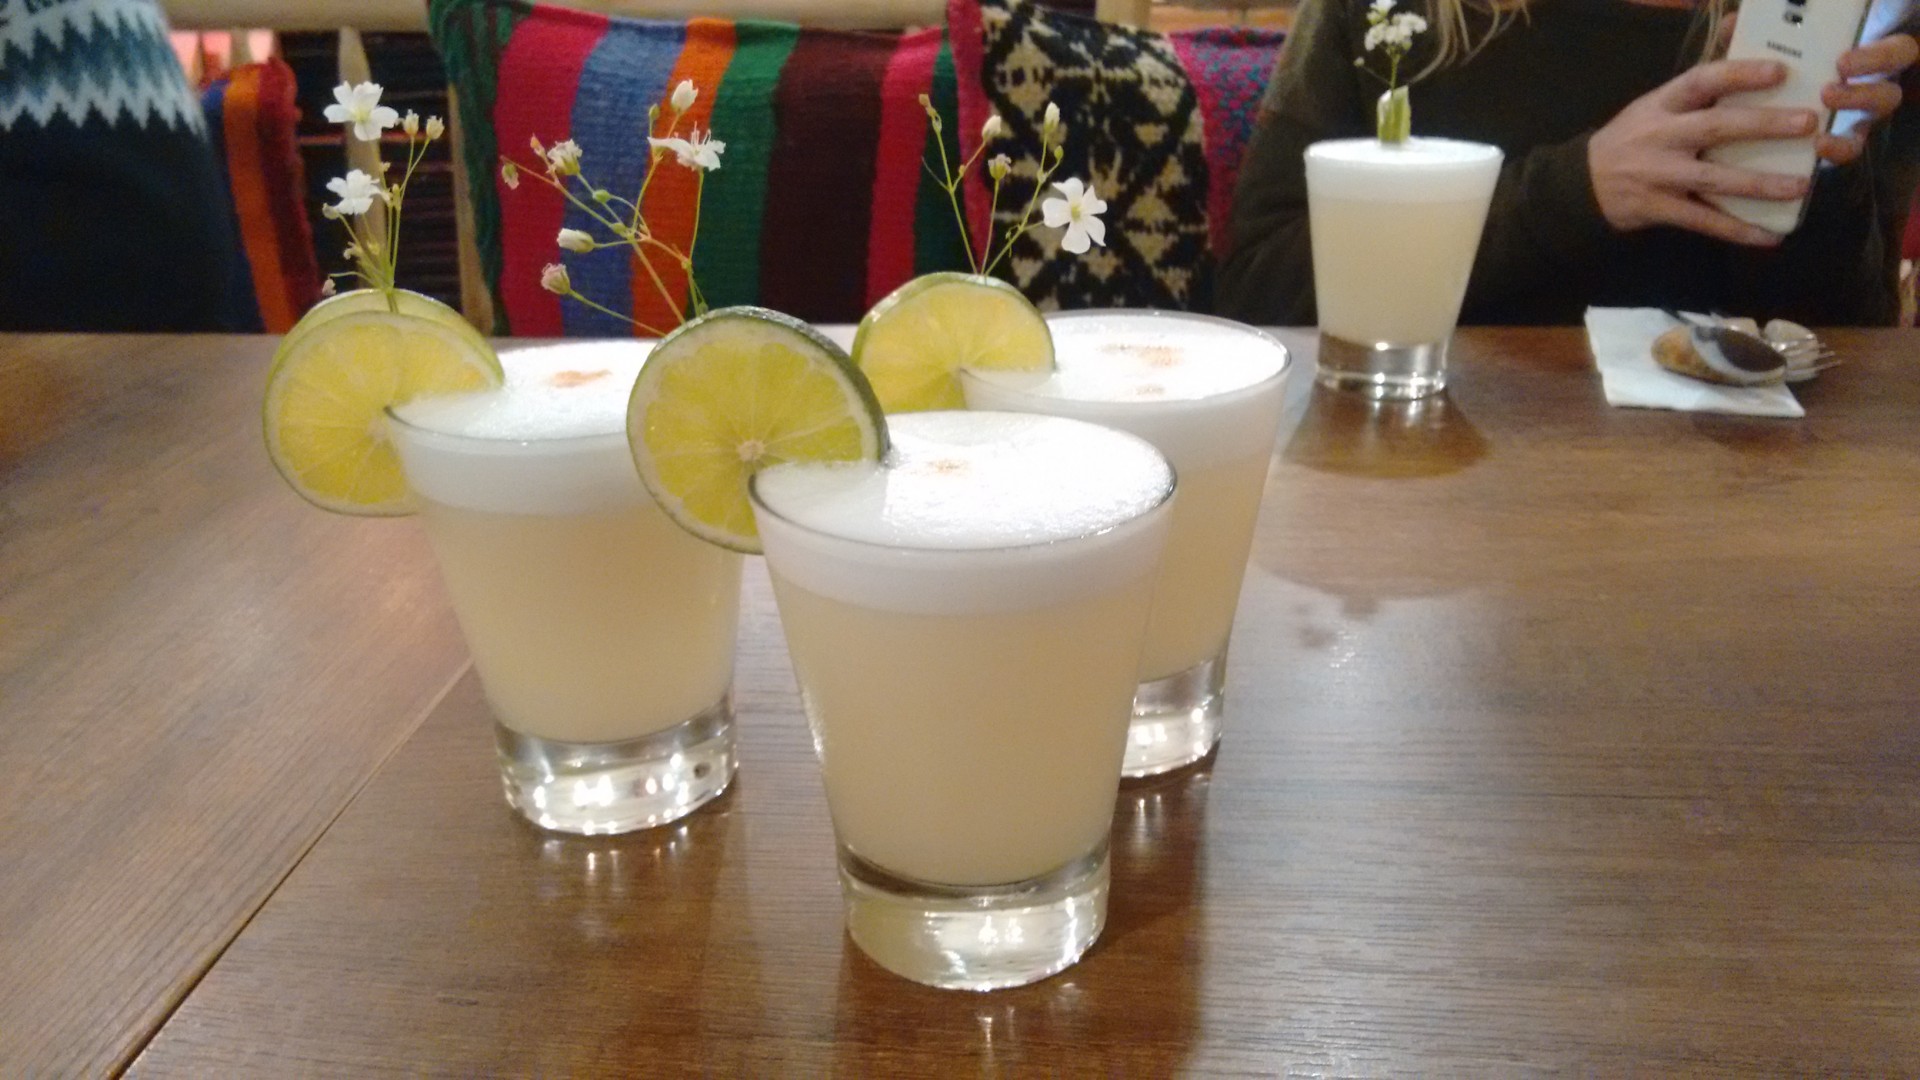 First Peruvian pisco sours. Not all for me.